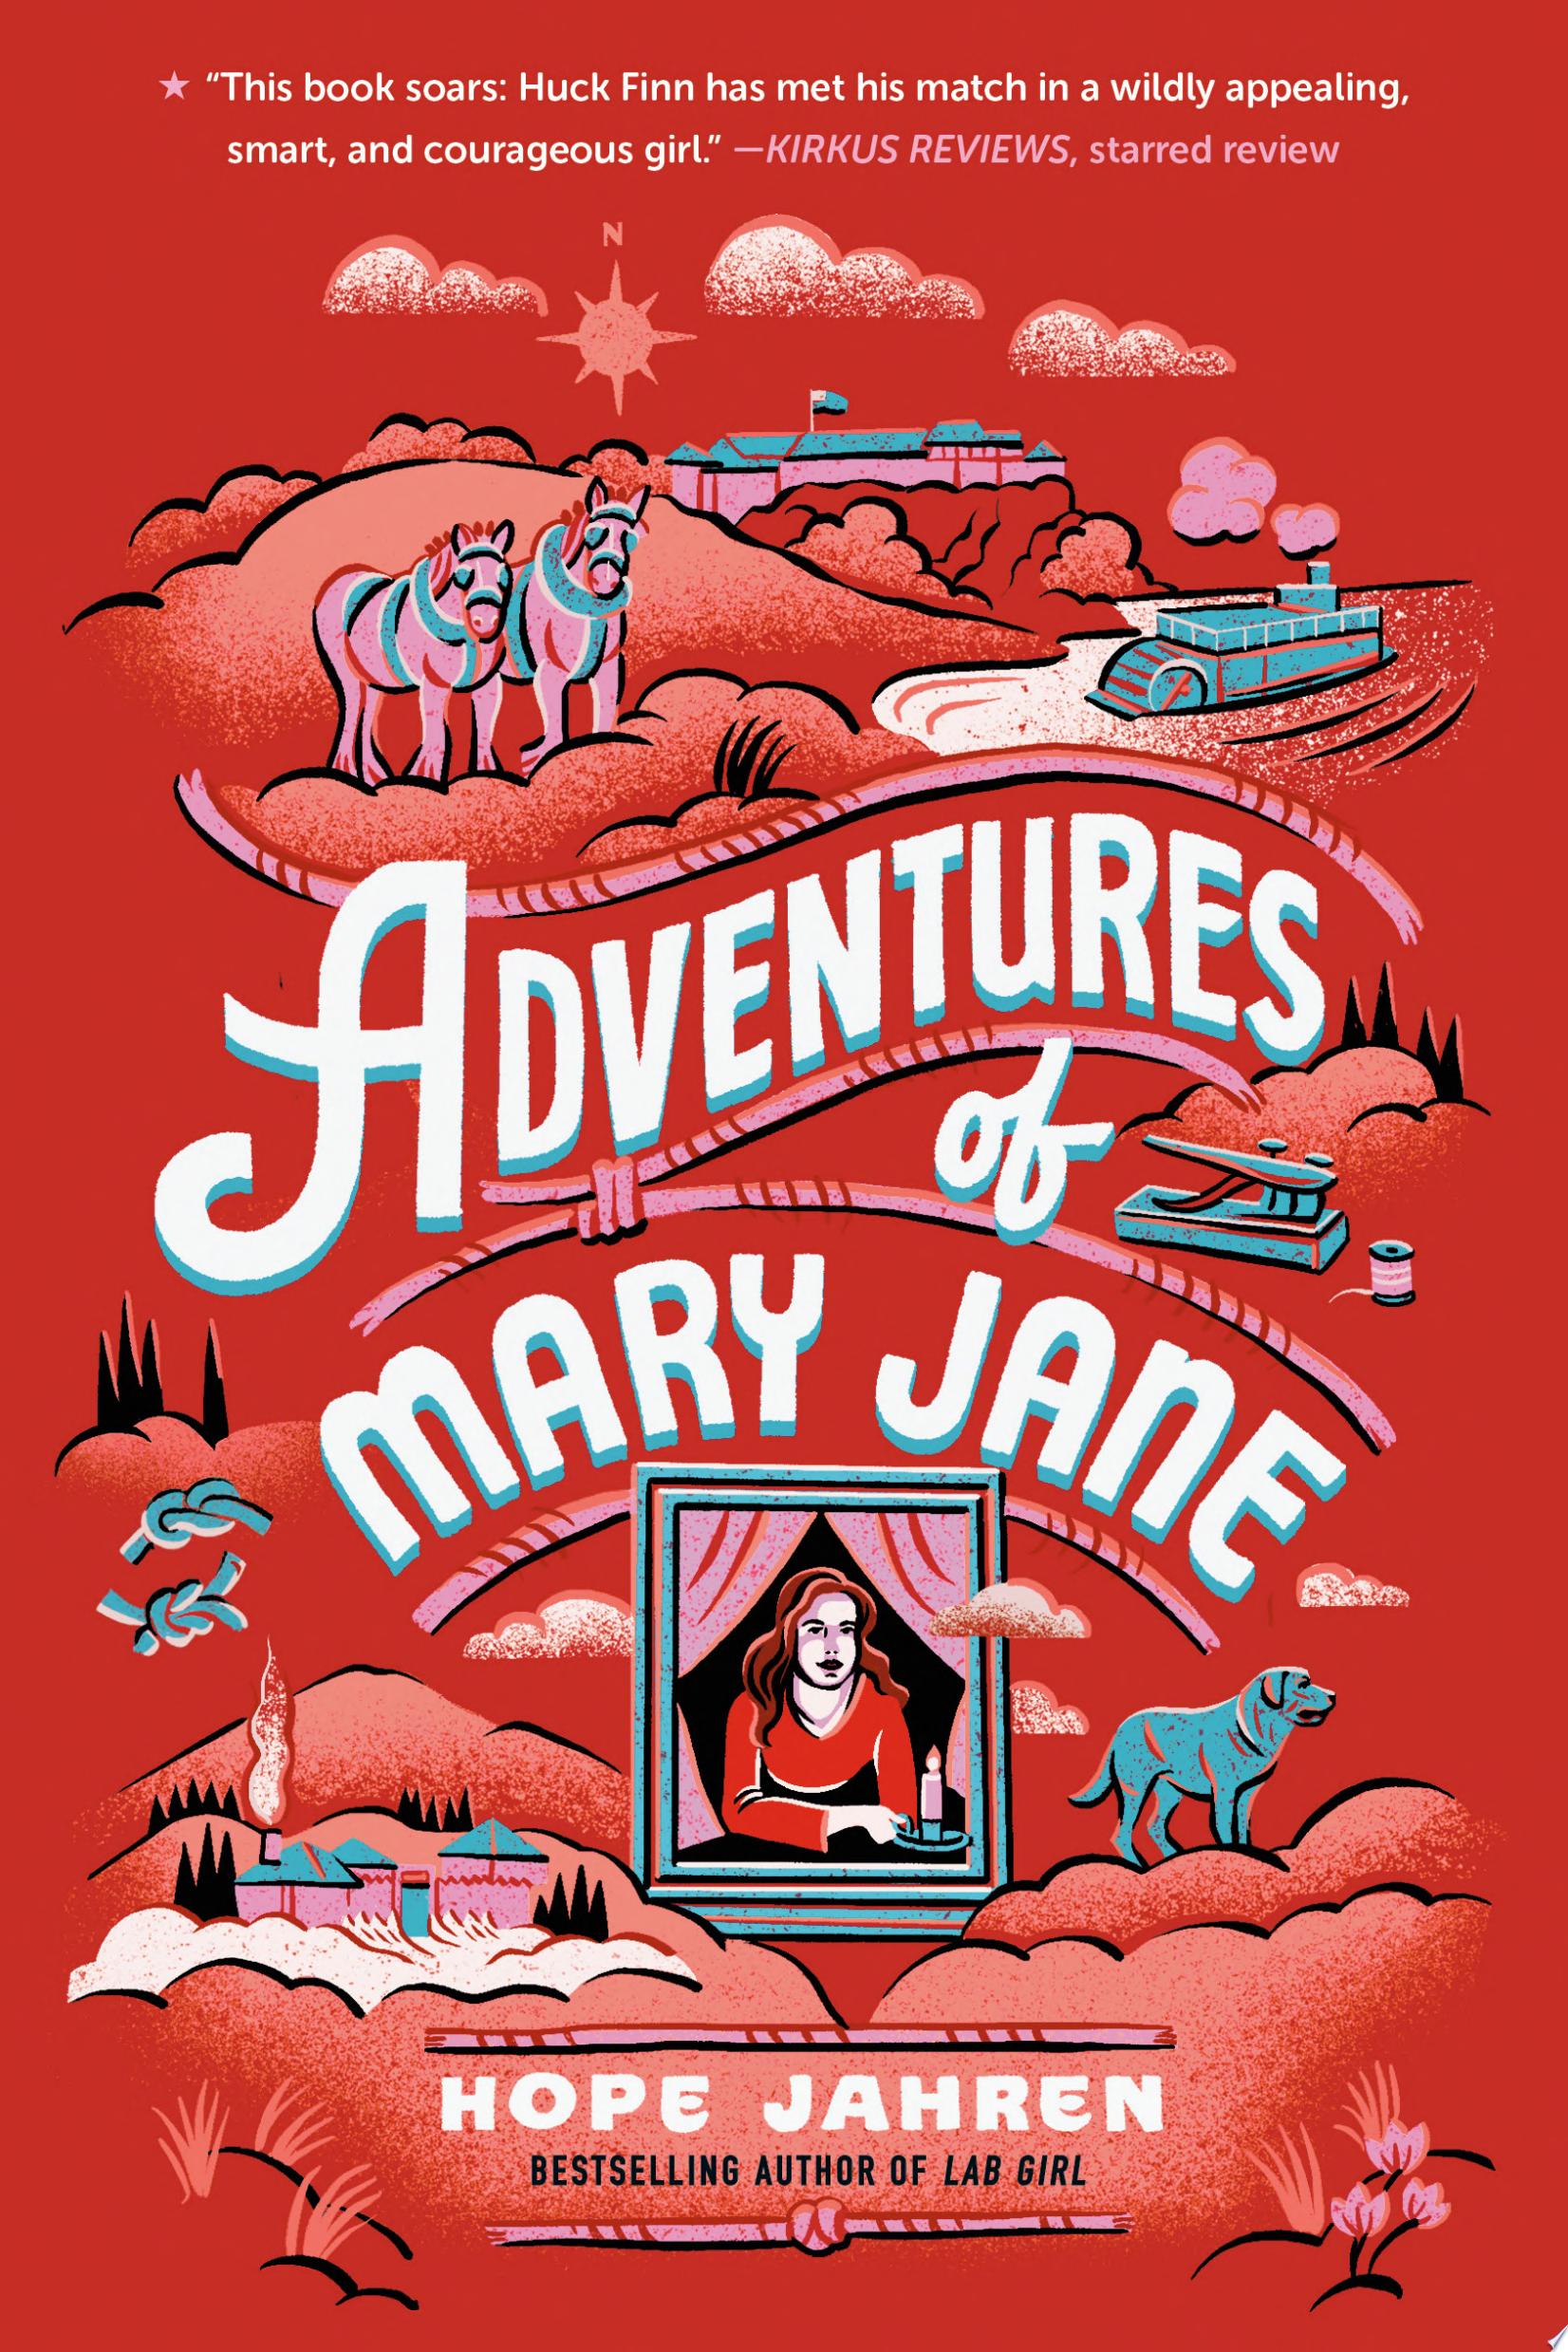 Image for "Adventures of Mary Jane"